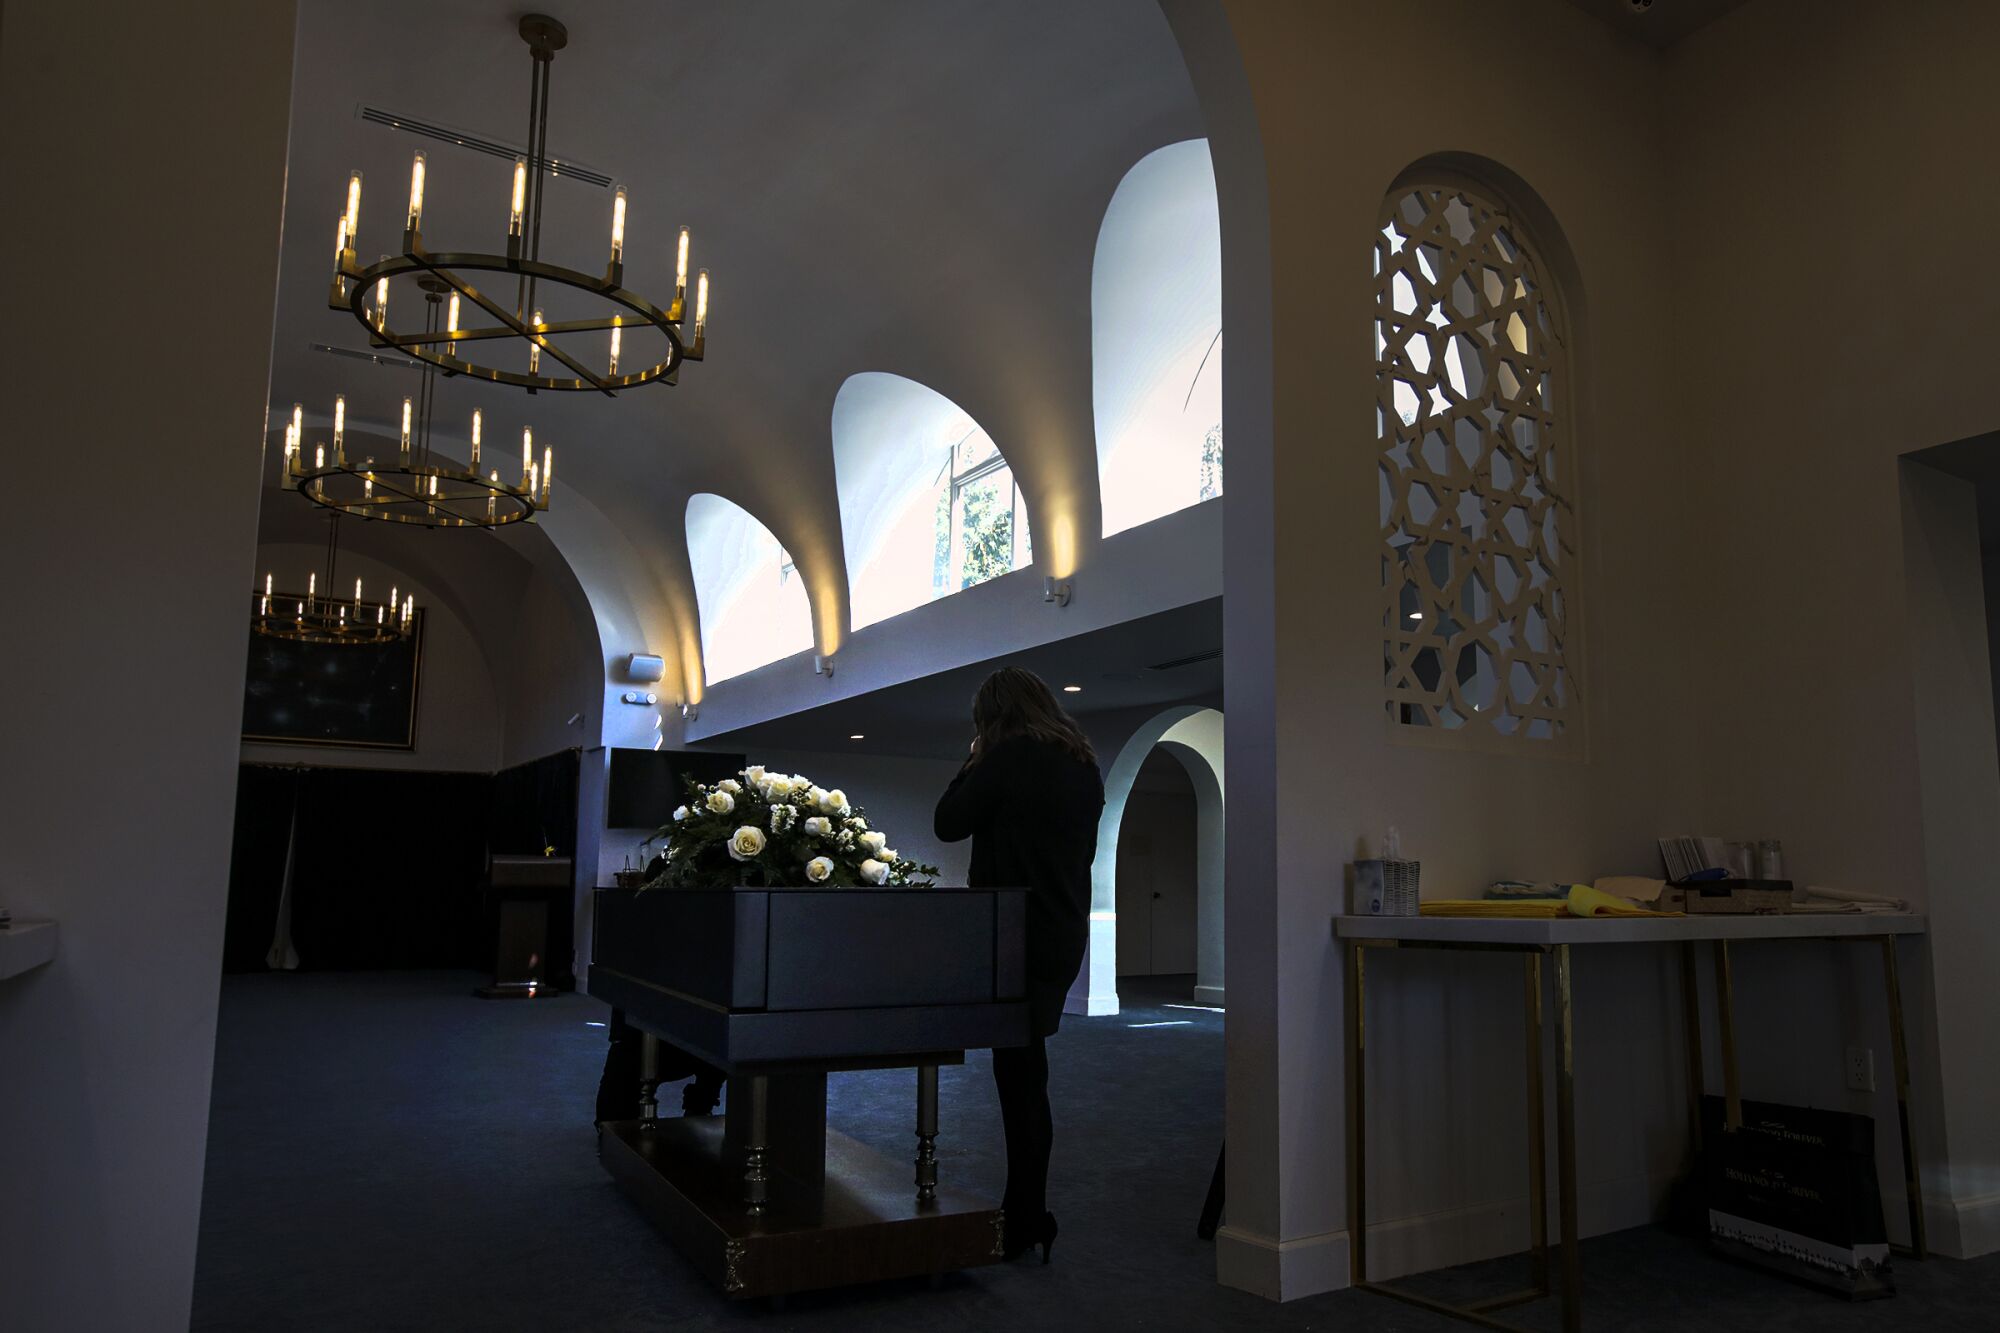 A lone woman is silhouetted next to a coffin topped with flowers in a dimly lit room with an arched ceiling